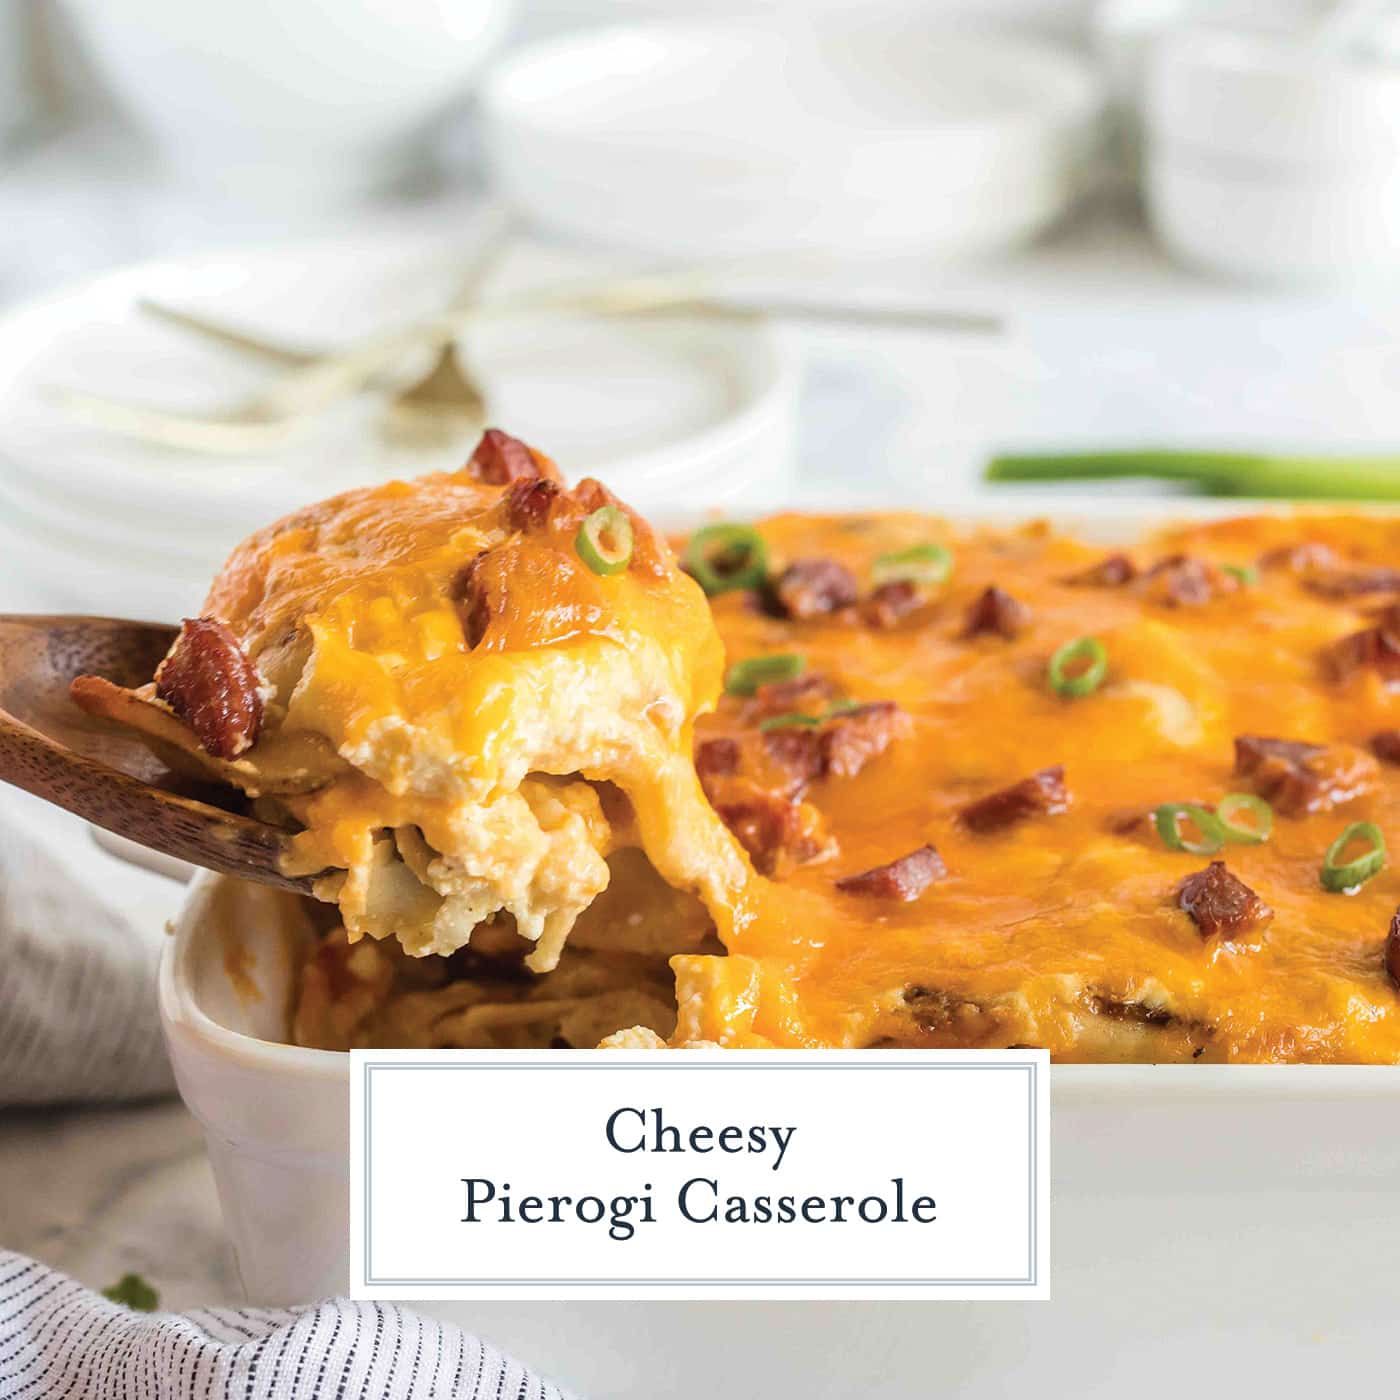 spoon scooping out cheesy casserole with text overlay for facebook